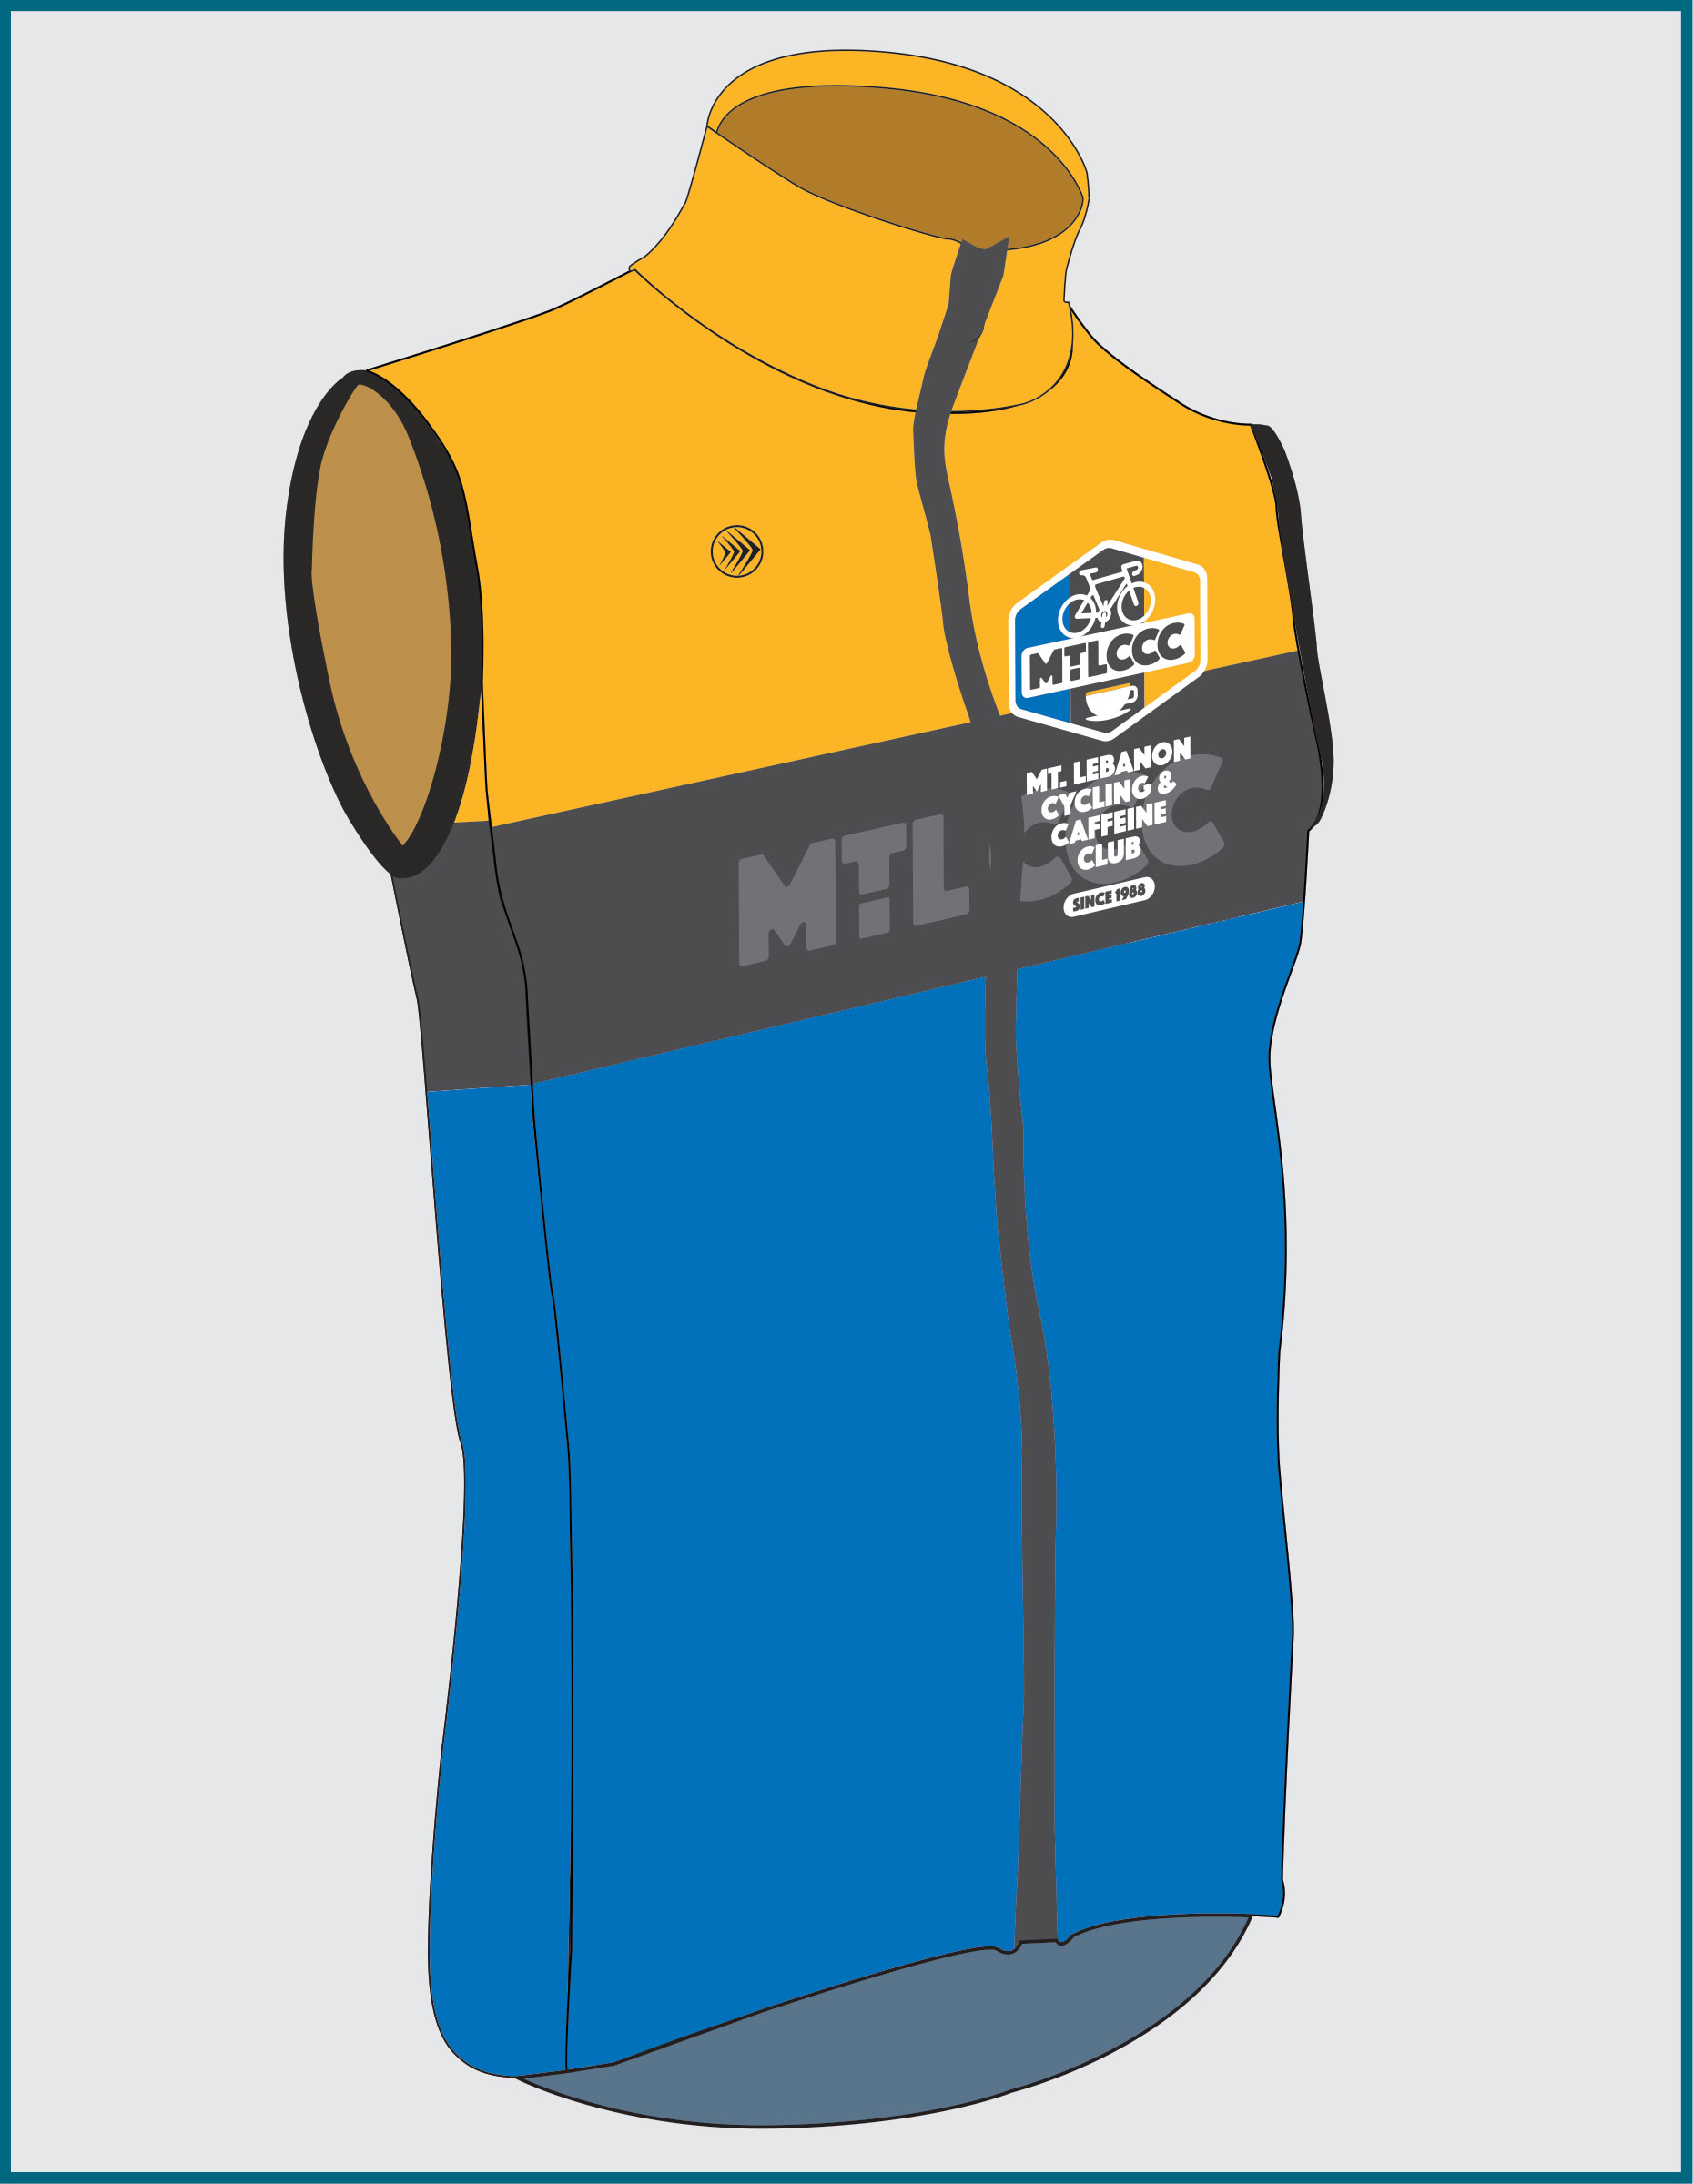 Mt. Lebanon Caffeine Club Vest - Back Pockets or Mesh Back Options Questions & Answers